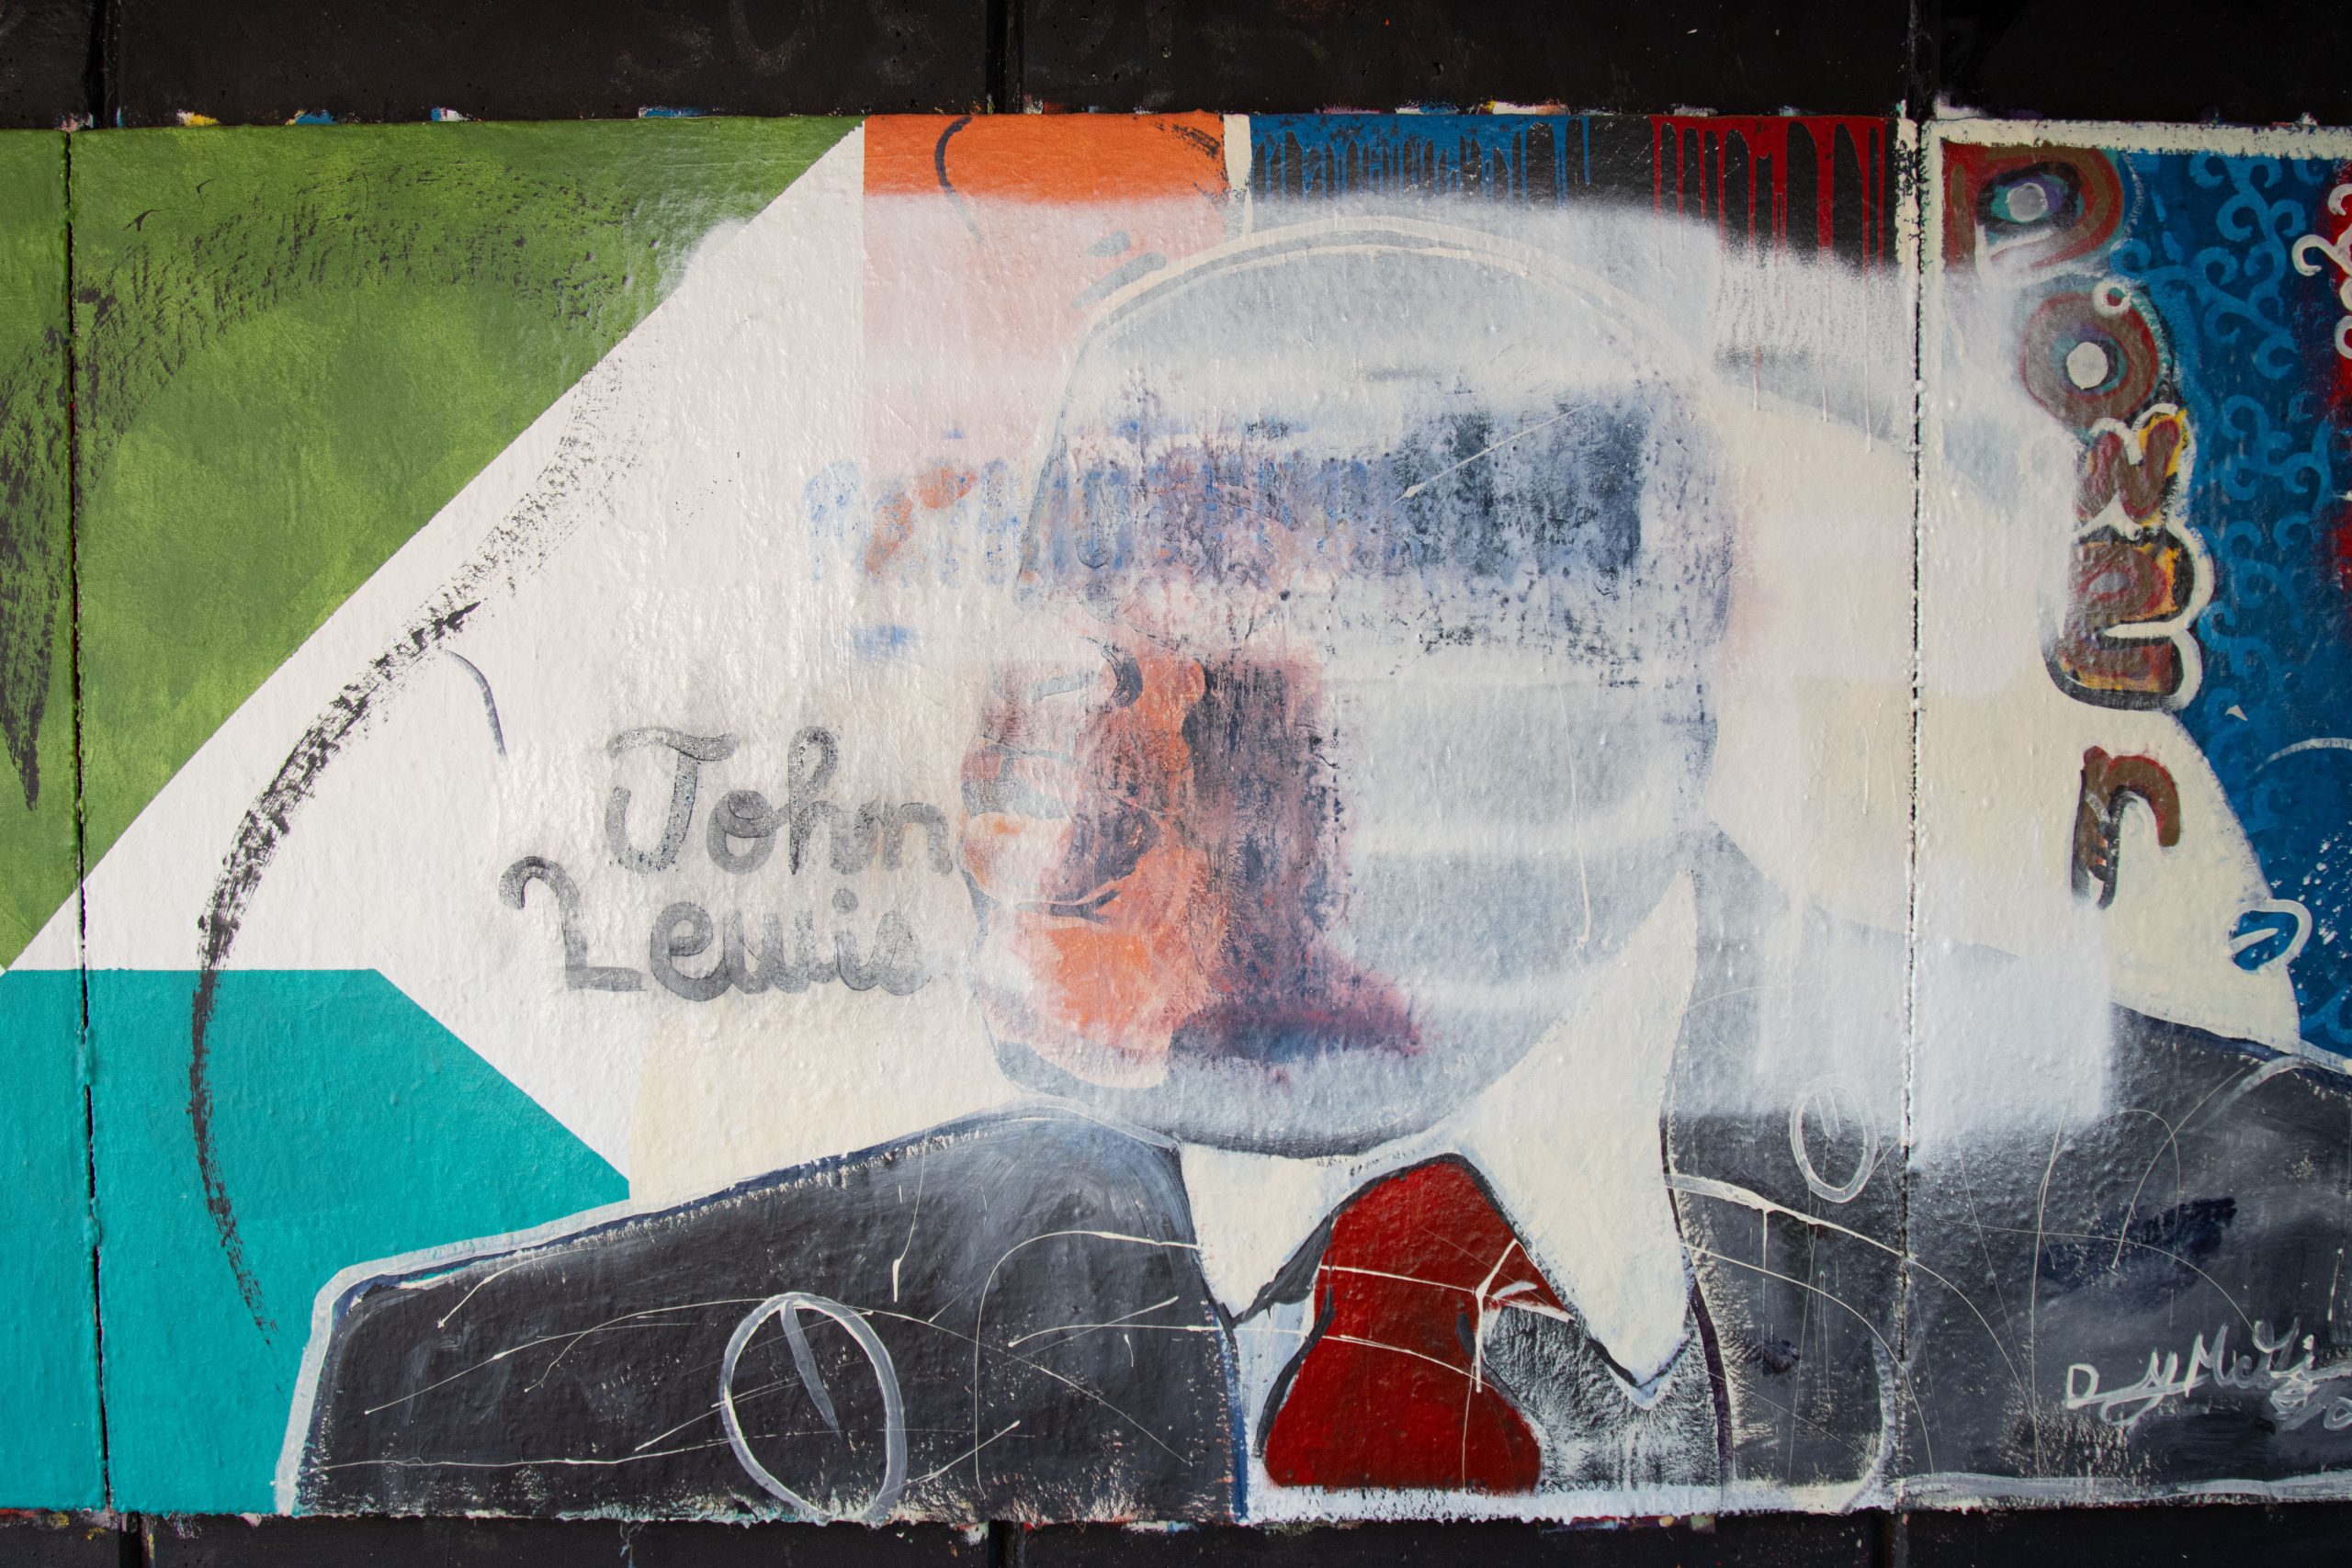 A painted mural of a man in a suit and red tie (and the text John Lewis to the left of his face) is covered by a white paint-like substance